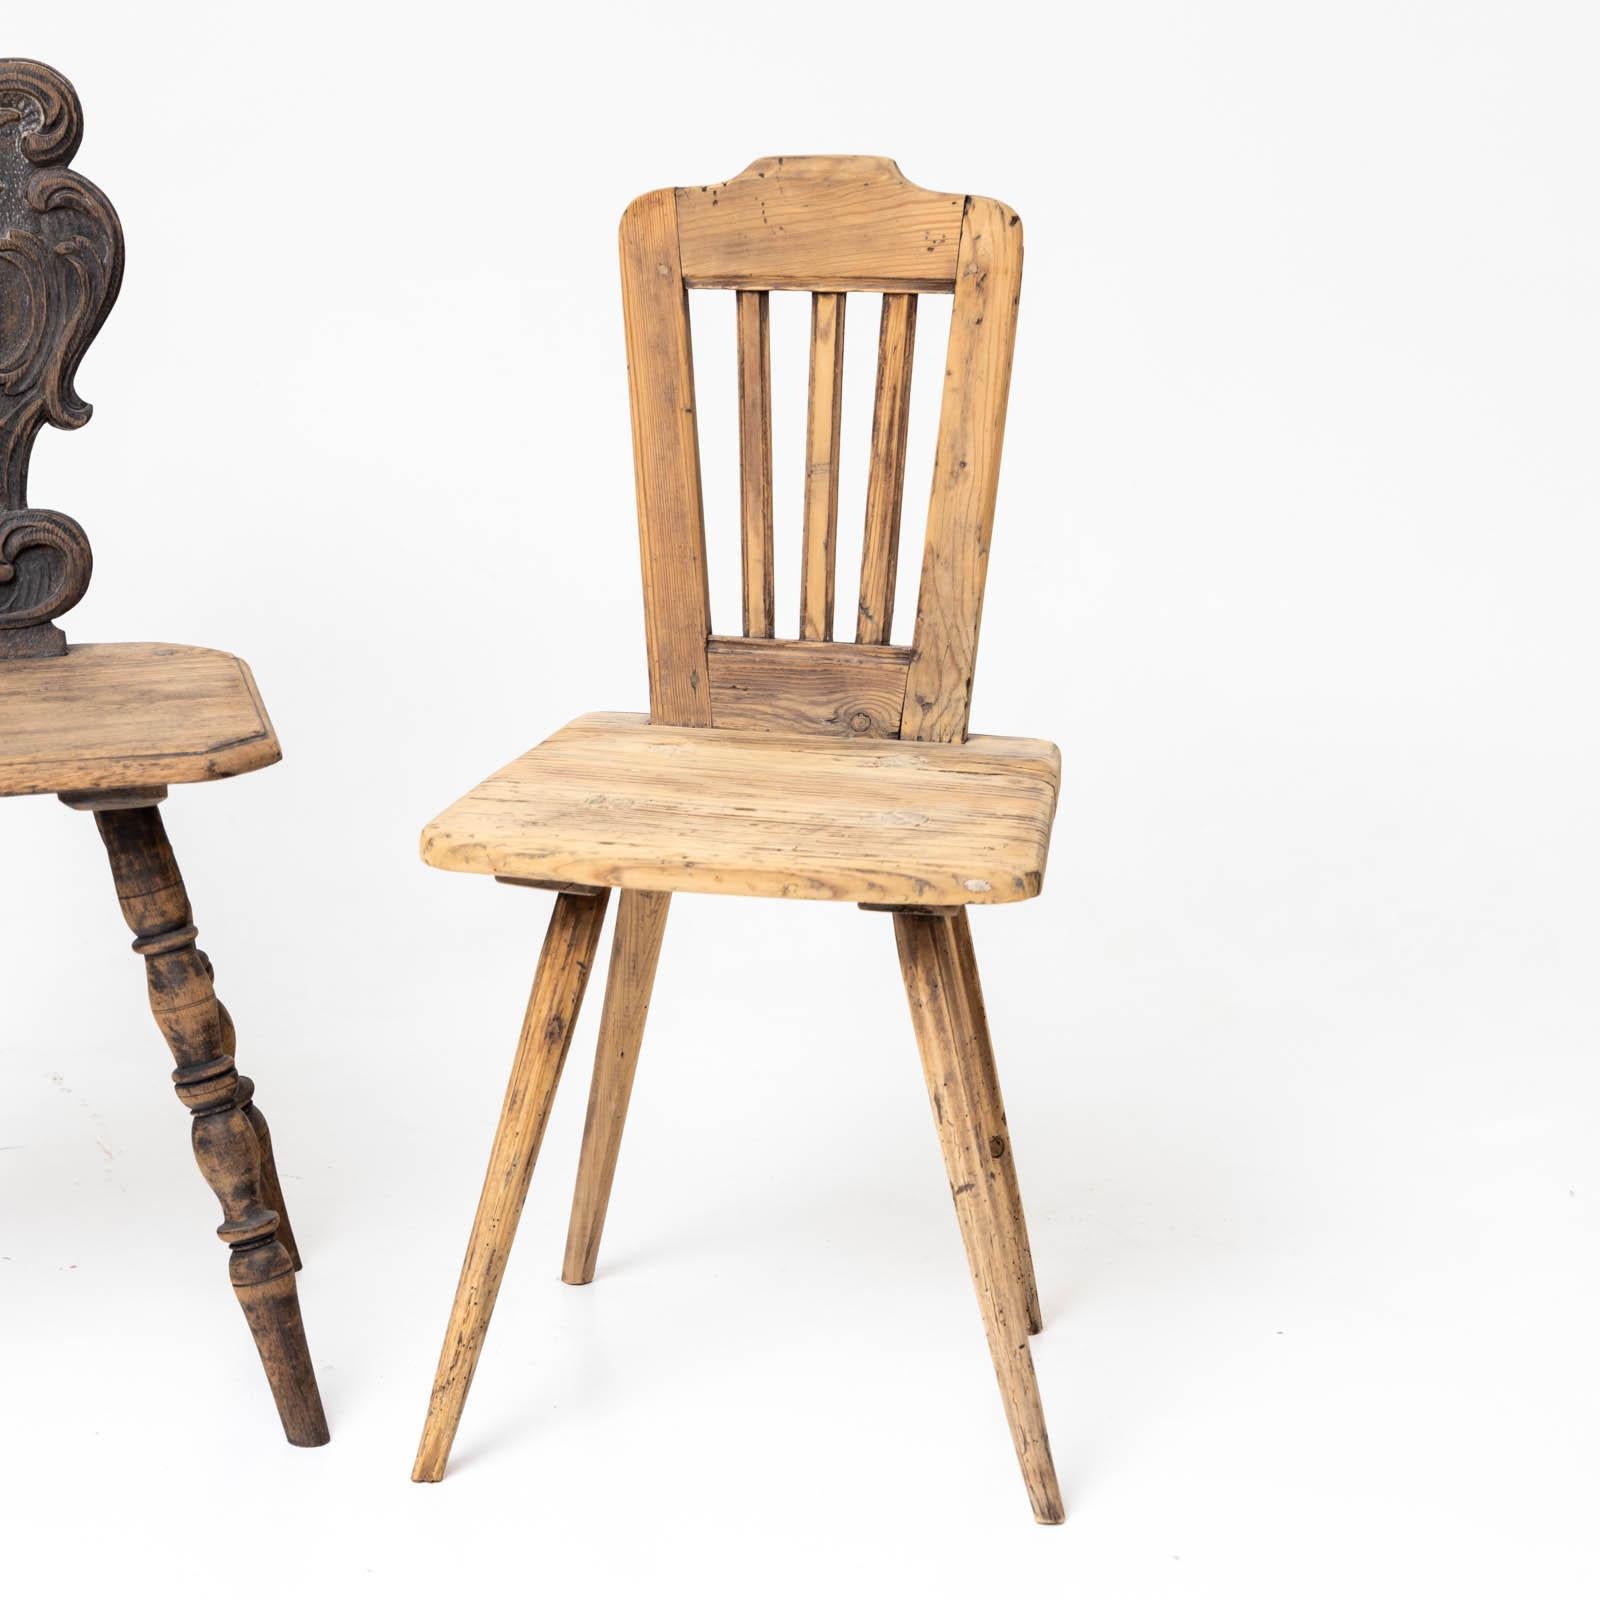 Carved Pair of rustic softwood chairs, 19th century